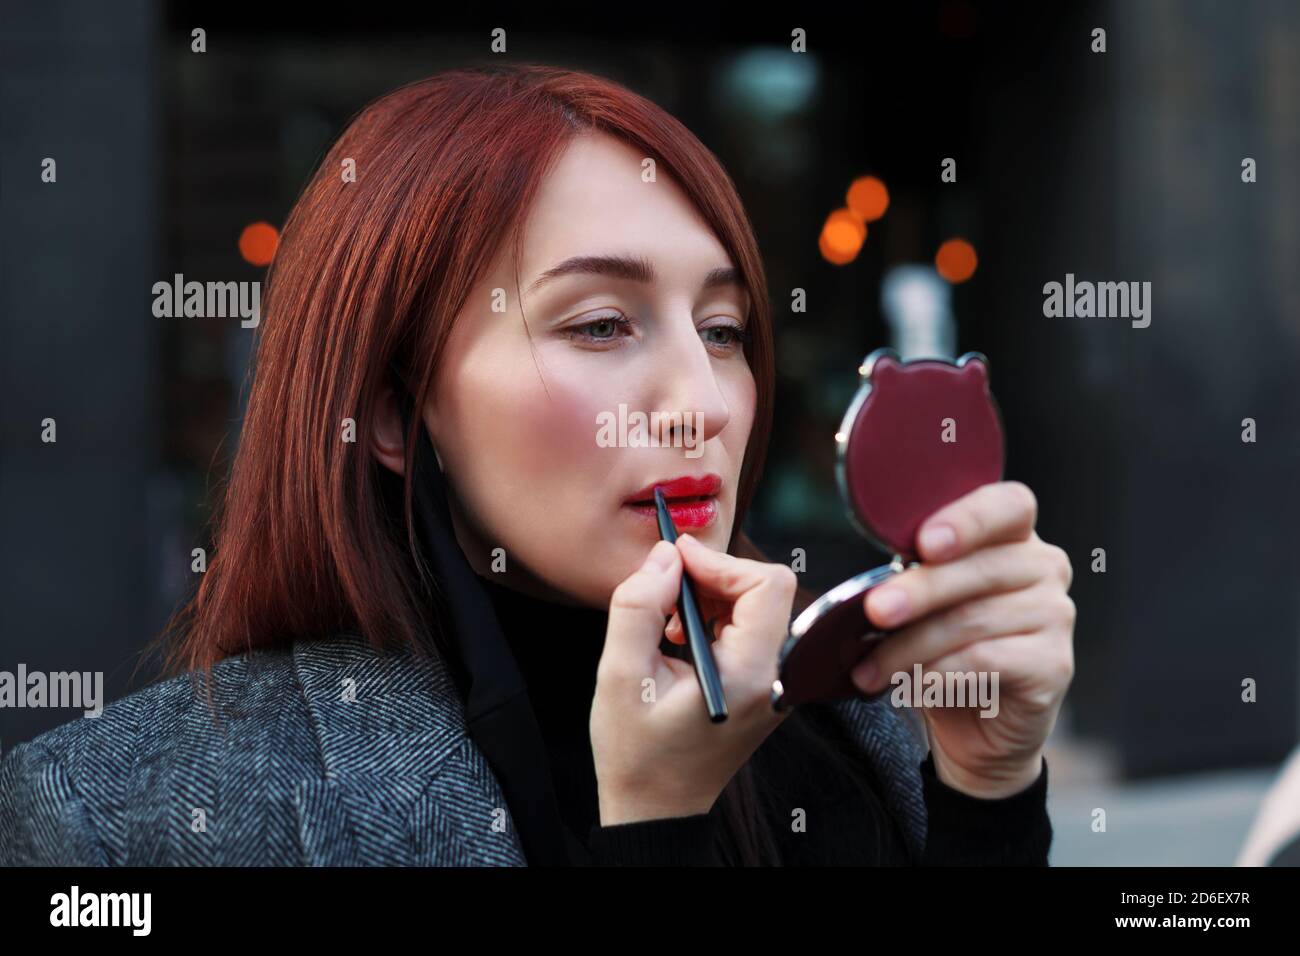 Pretty redhead woman looks at pocket mirror and applys red lipstic before business meeting. Dating after work concept. Stock Photo